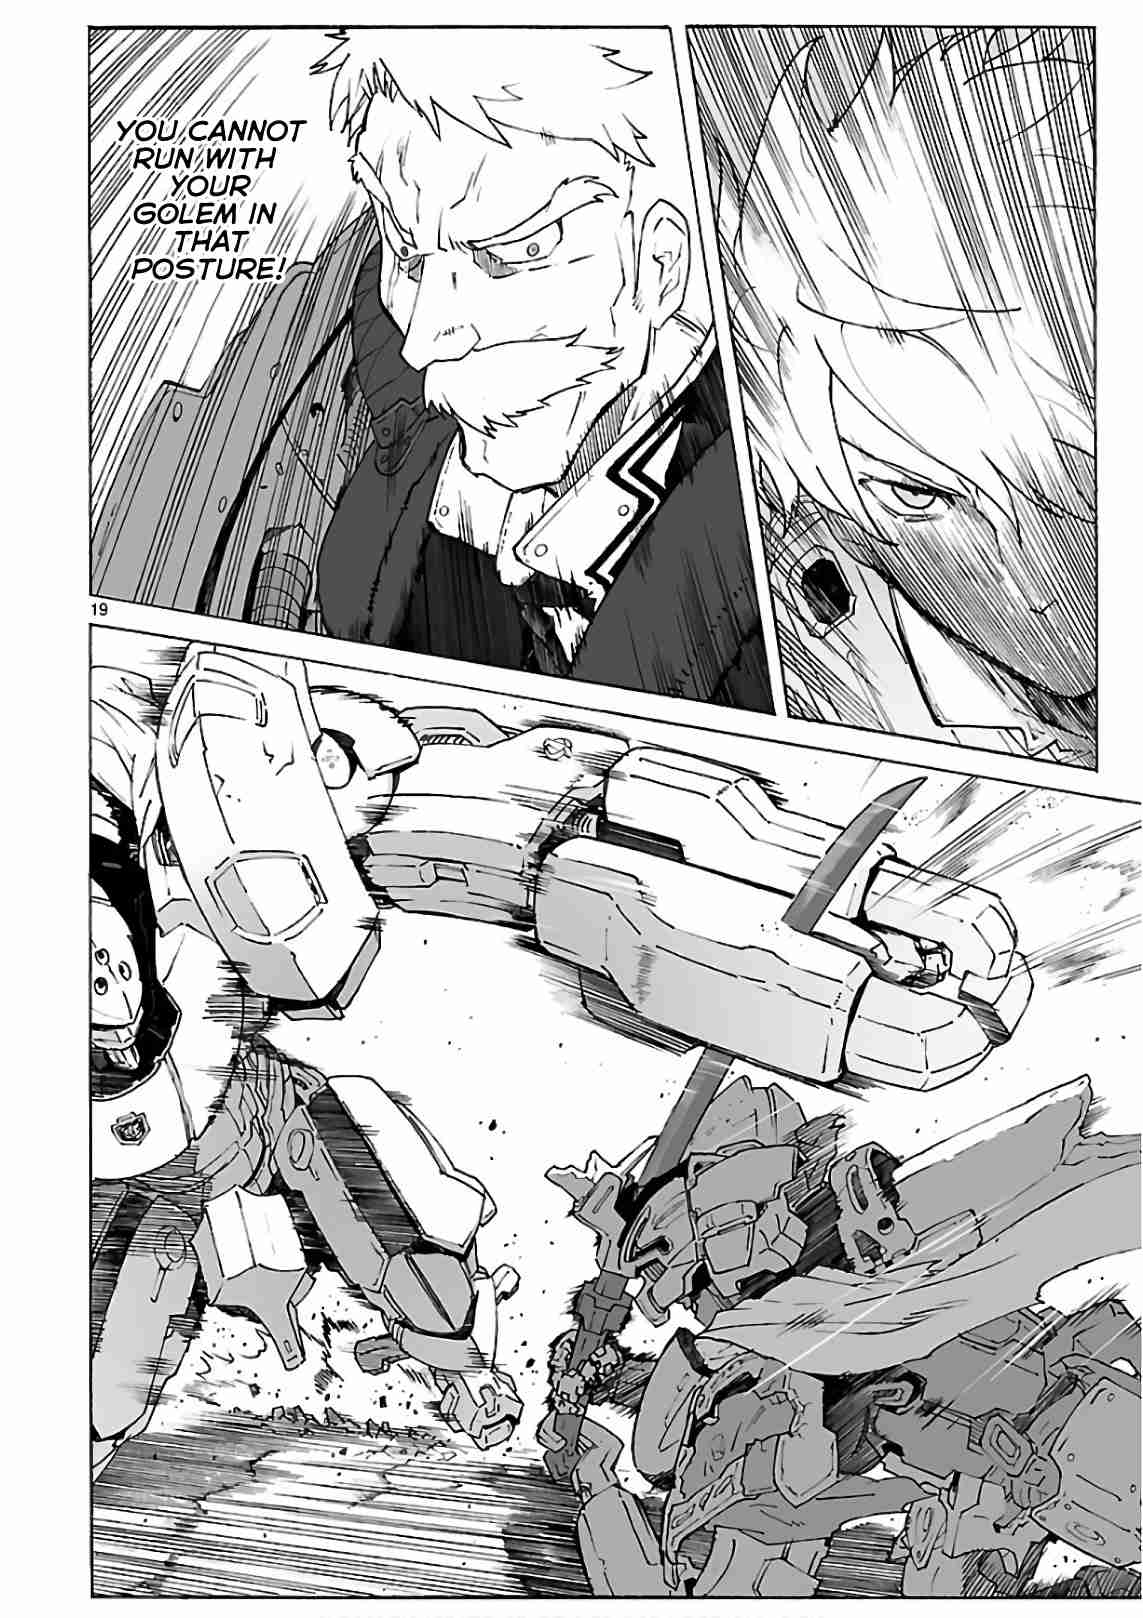 Break Blade Vol. 17 Ch. 92 Carrying Out One's Original Intentions